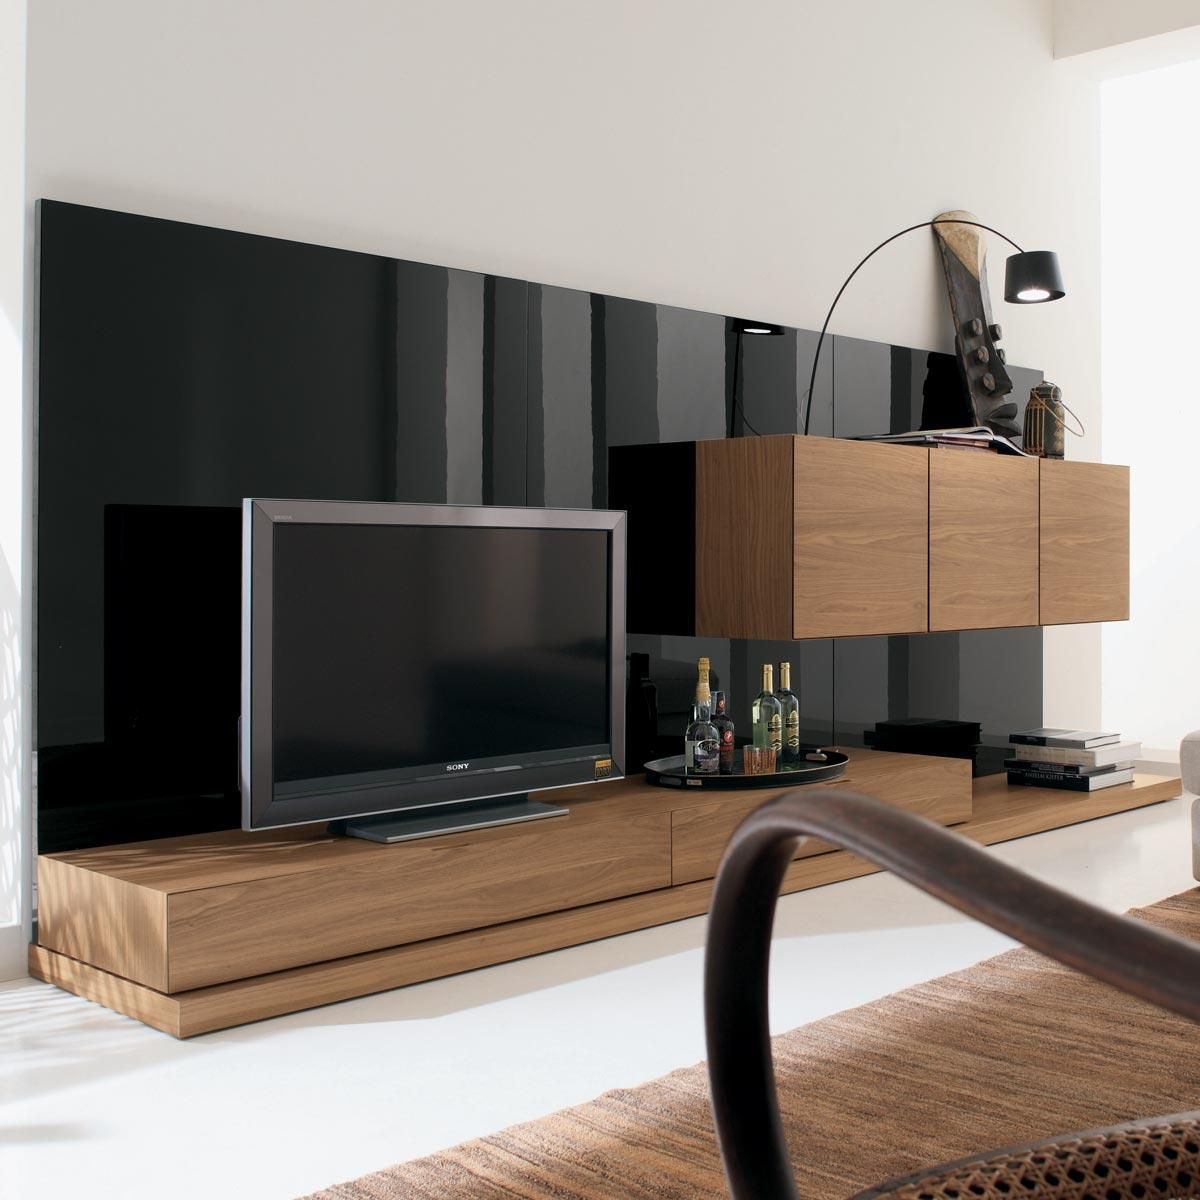 Solid Wood Tv Stand Also Long Tv Stand And Black Wall Regarding Long Oak Tv Stands (View 7 of 15)